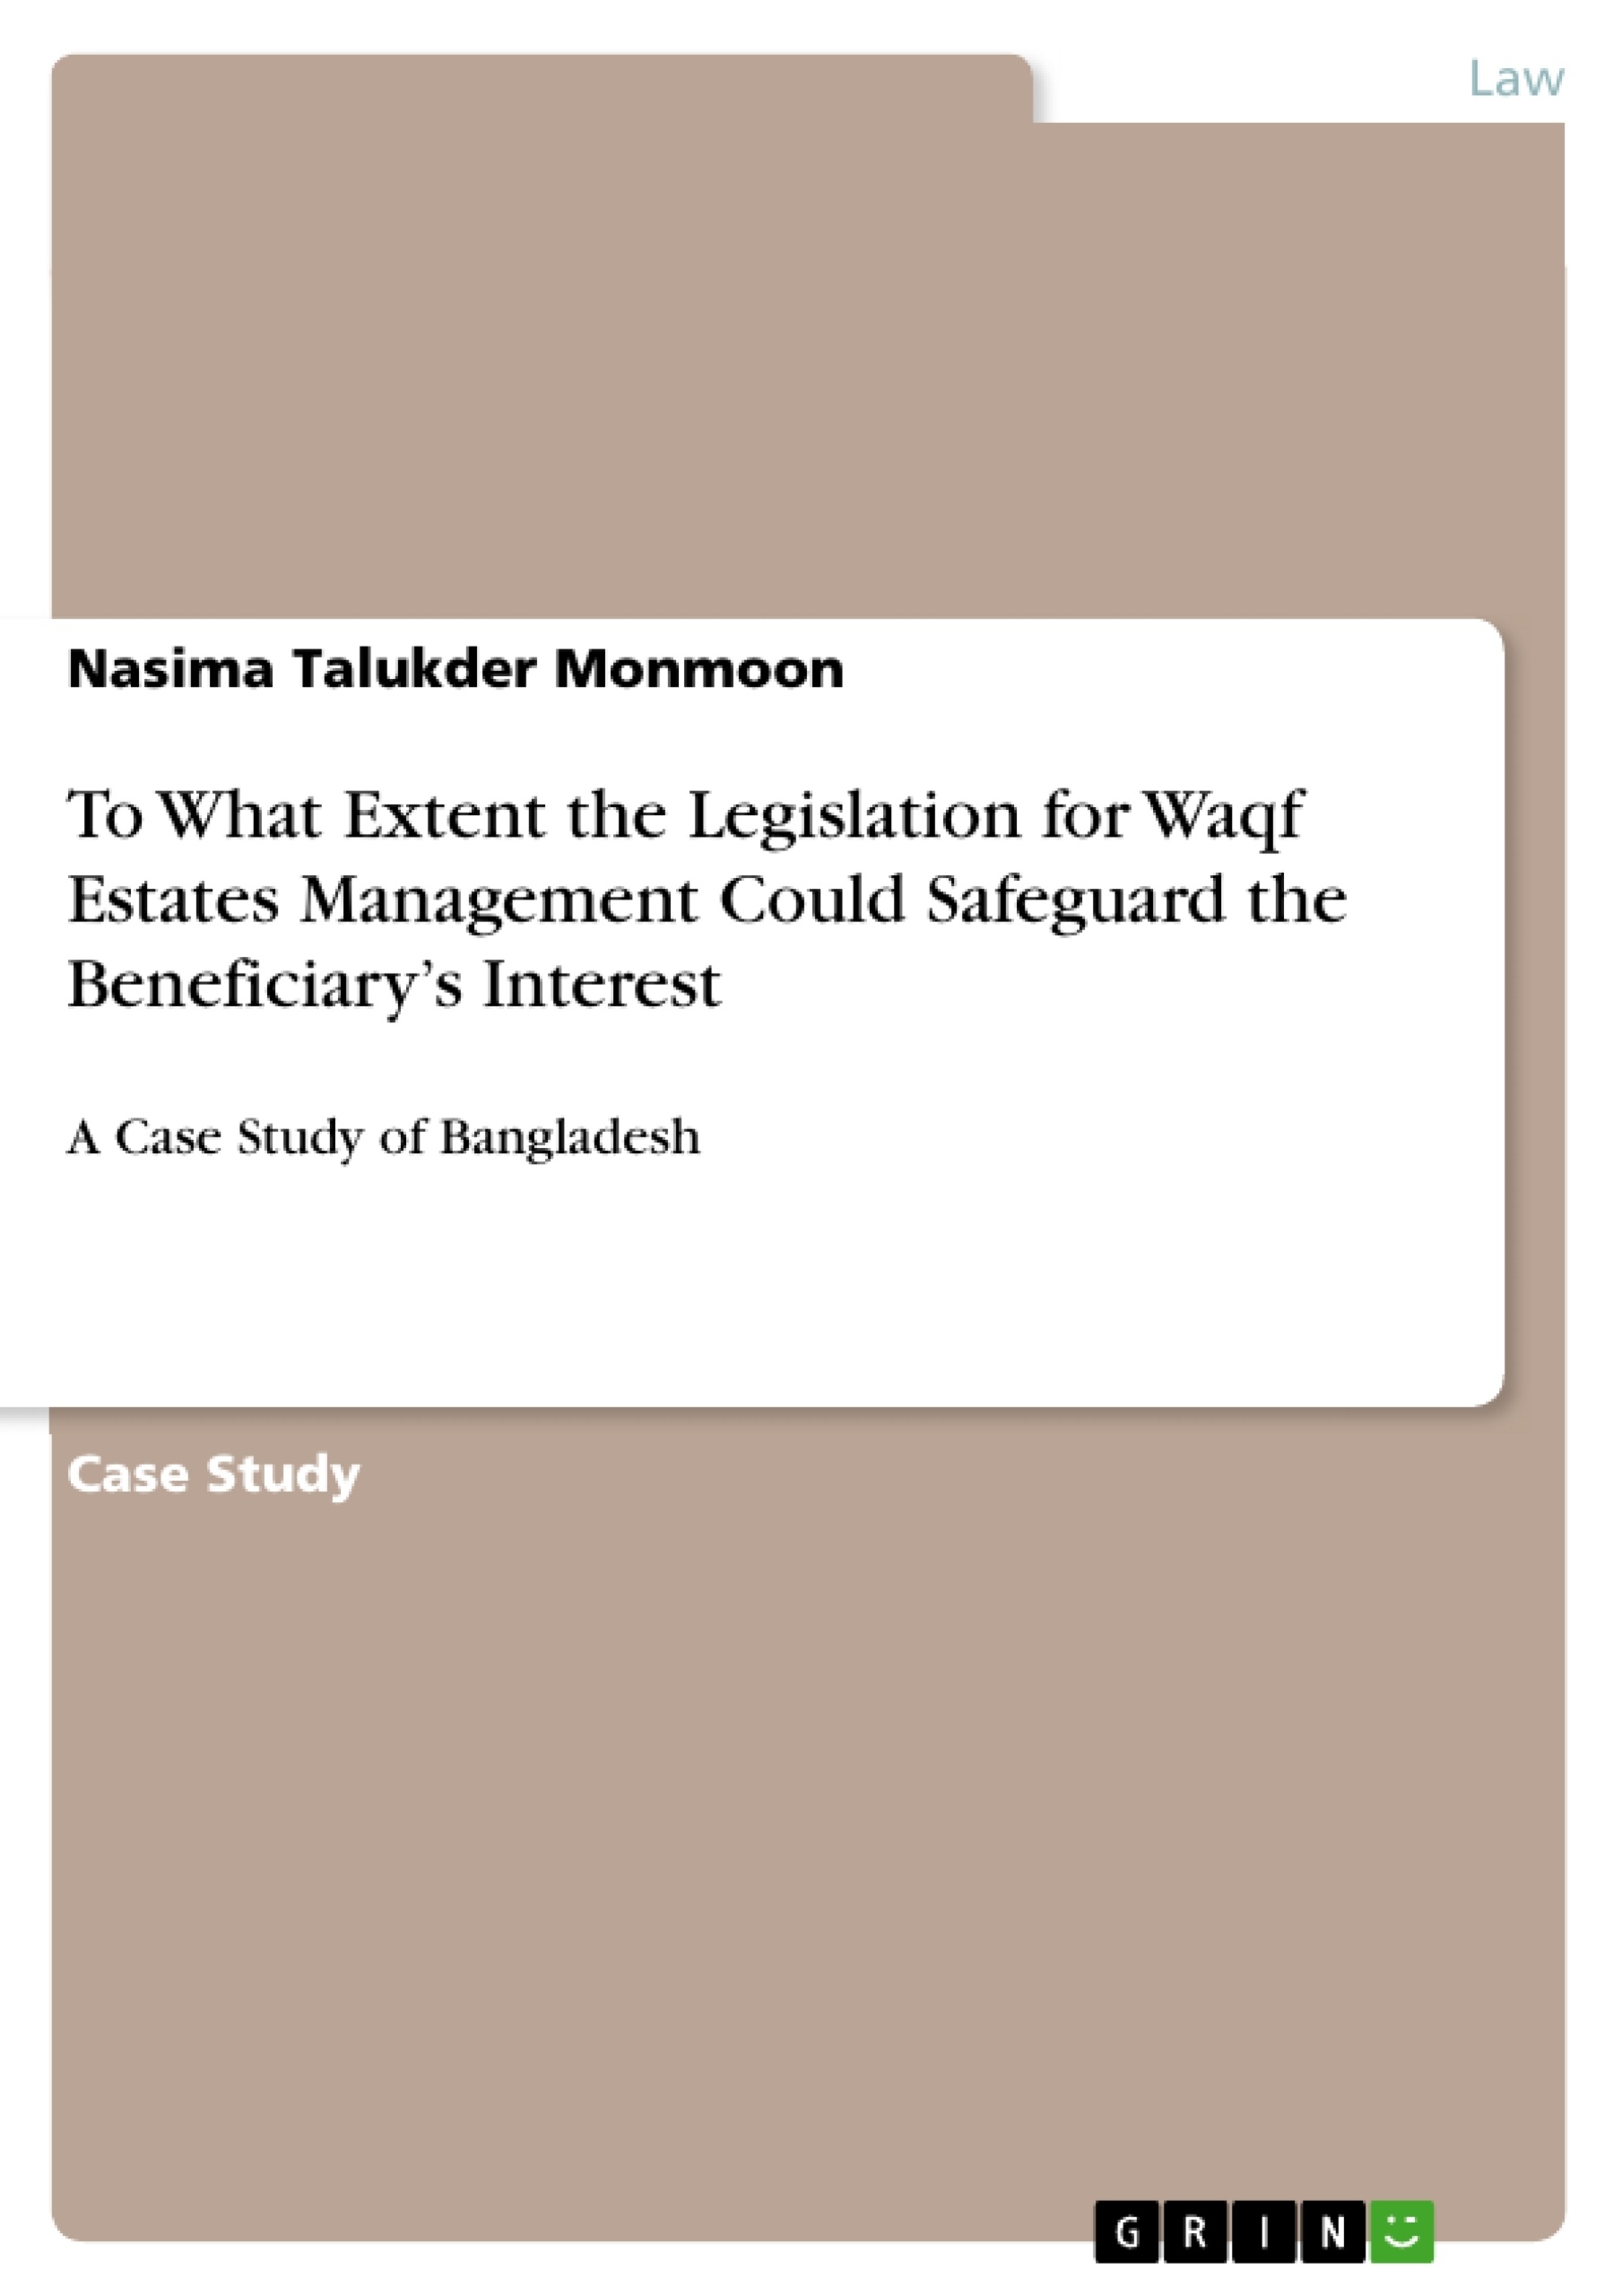 Titel: To What Extent the Legislation for Waqf Estates Management Could Safeguard the Beneficiary’s Interest